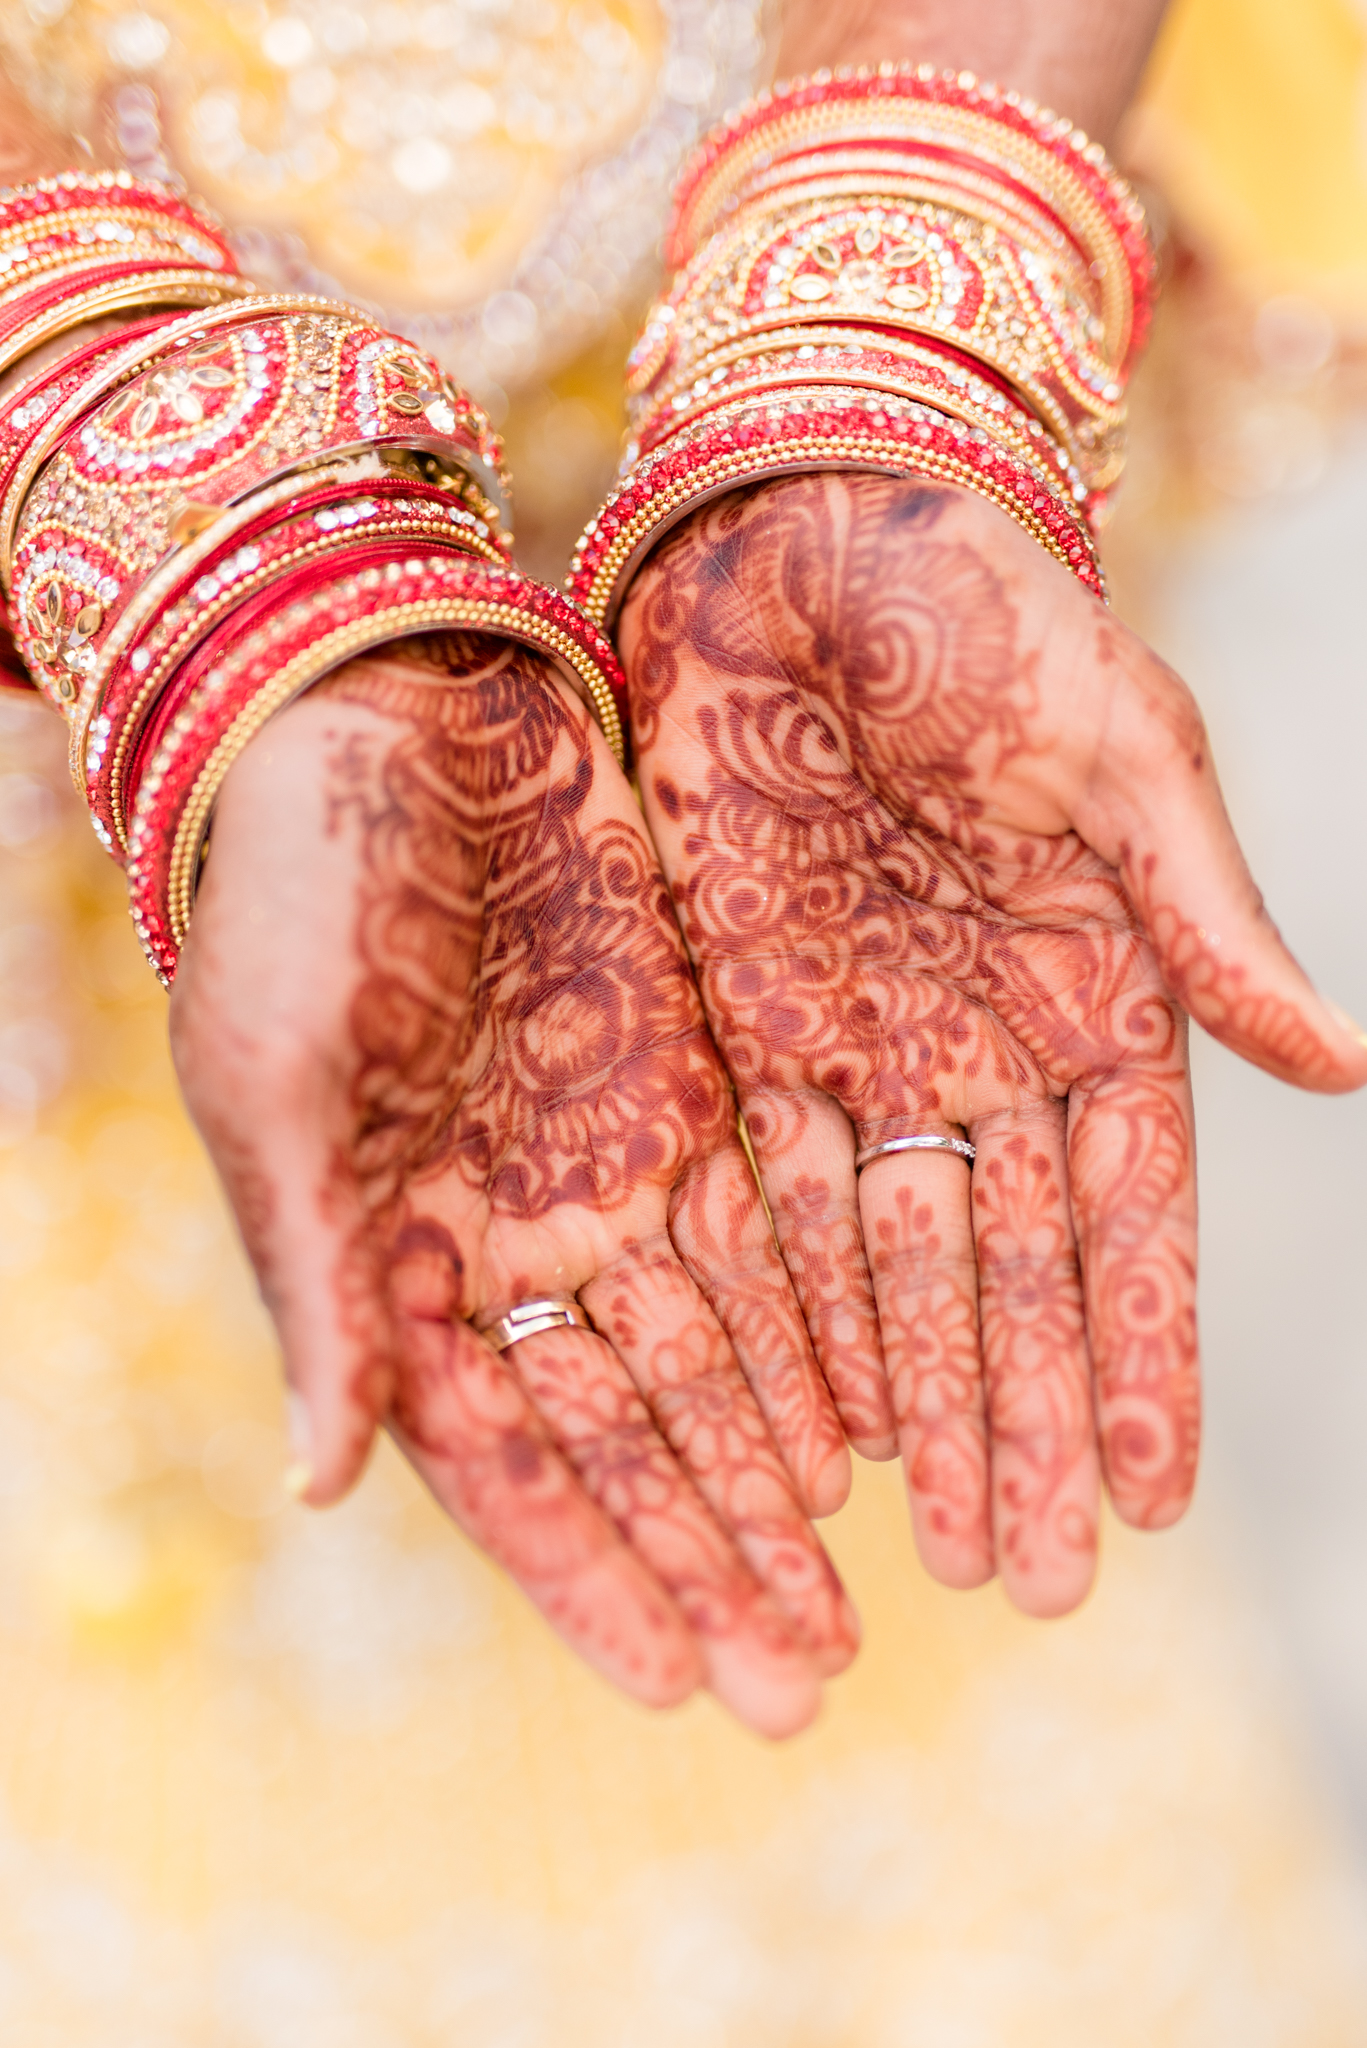 Bride shows off the henna on her hands.